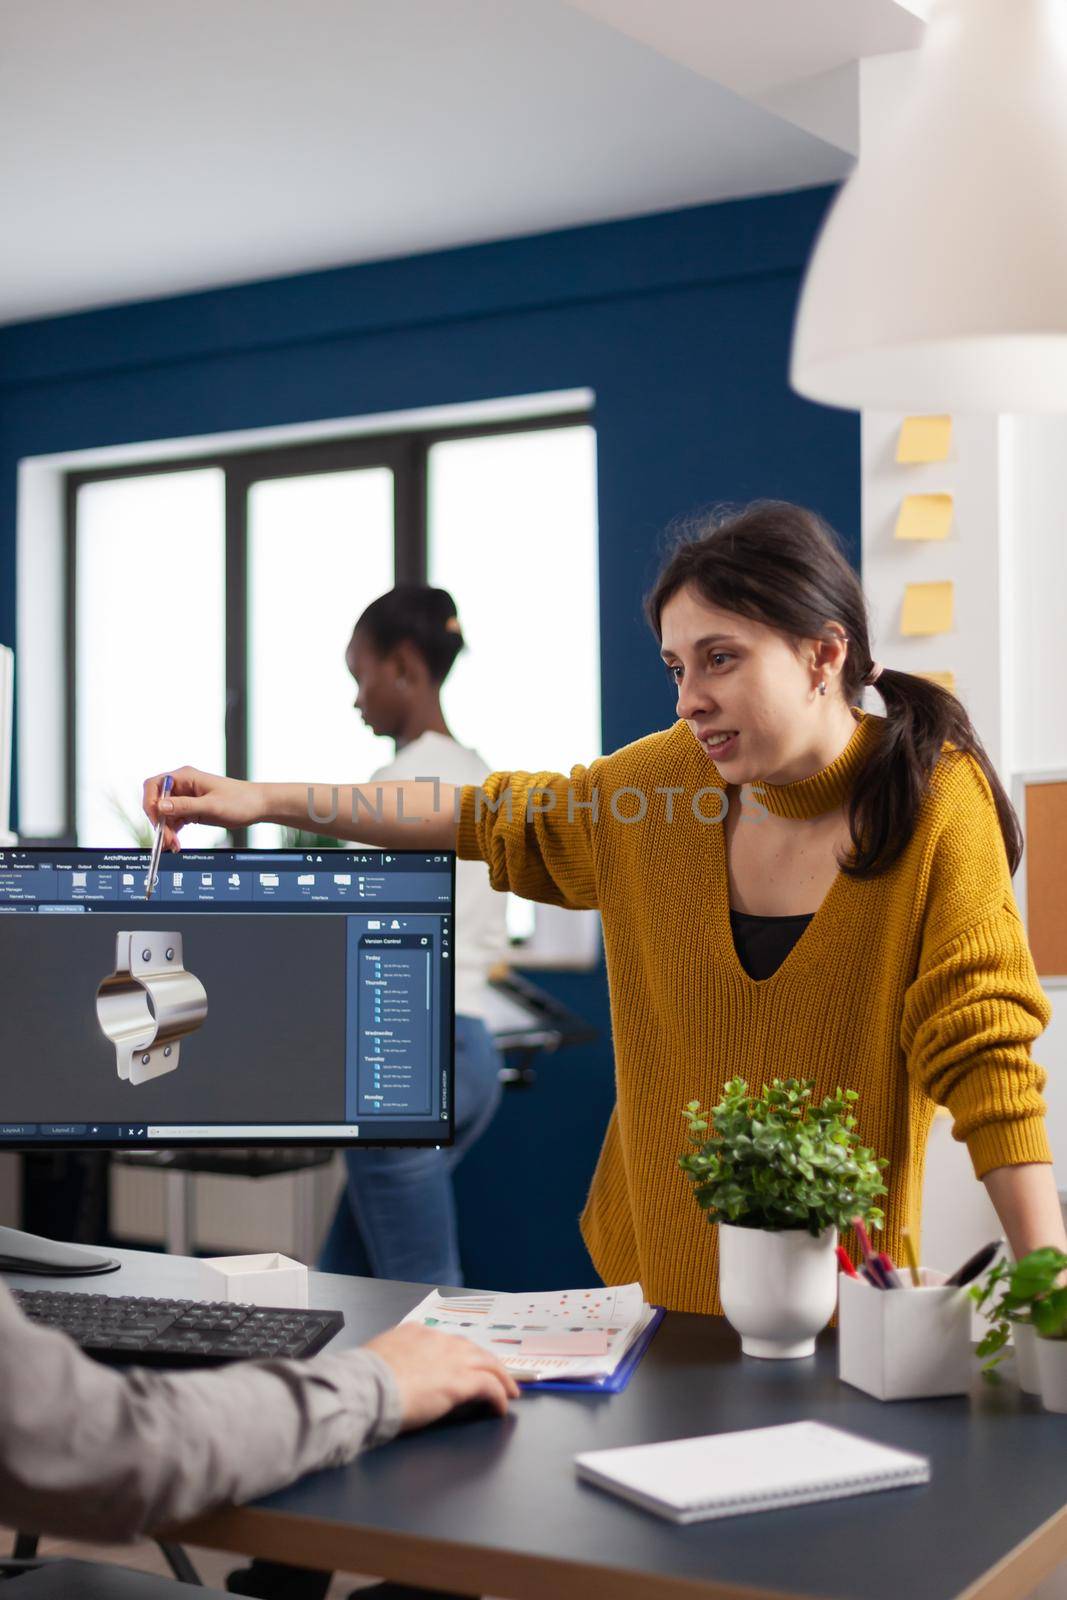 Team discussing about industrial project using dual monitors setup to desing 3D gears and metalic clamp in CAD software. Woman industrial engineer project manager working in creative office